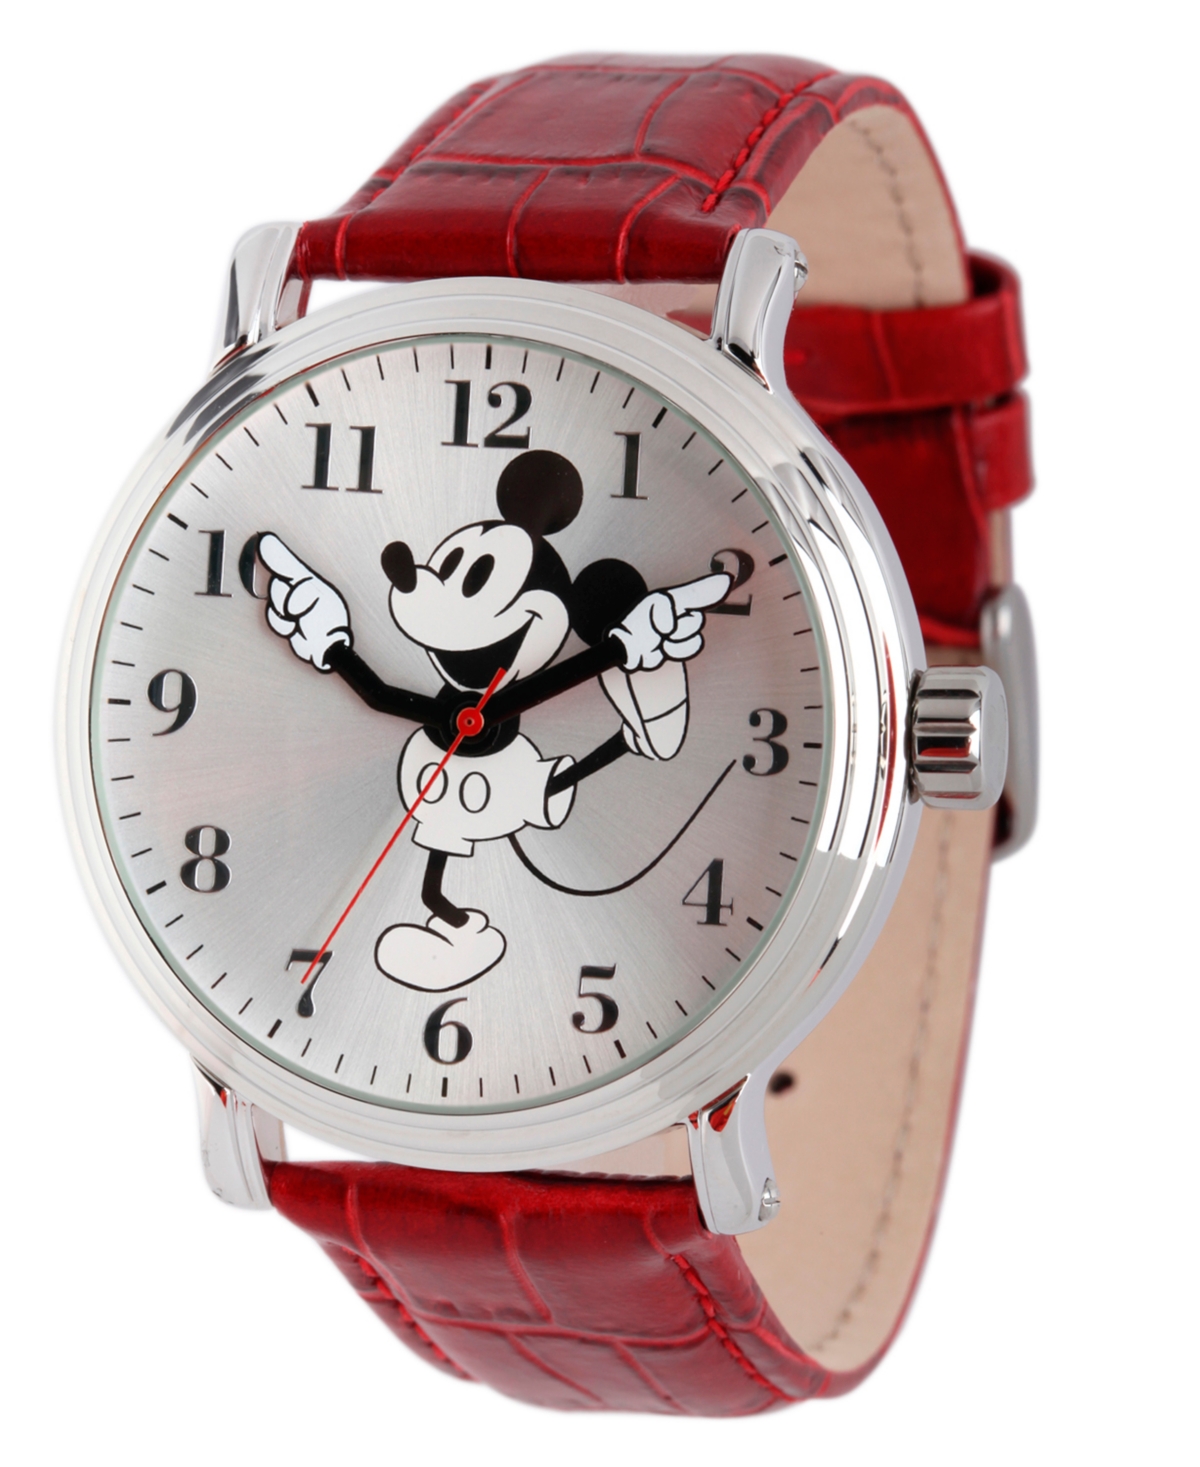 Disney Mickey Mouse Men's Shiny Silver Vintage Alloy Watch - Red